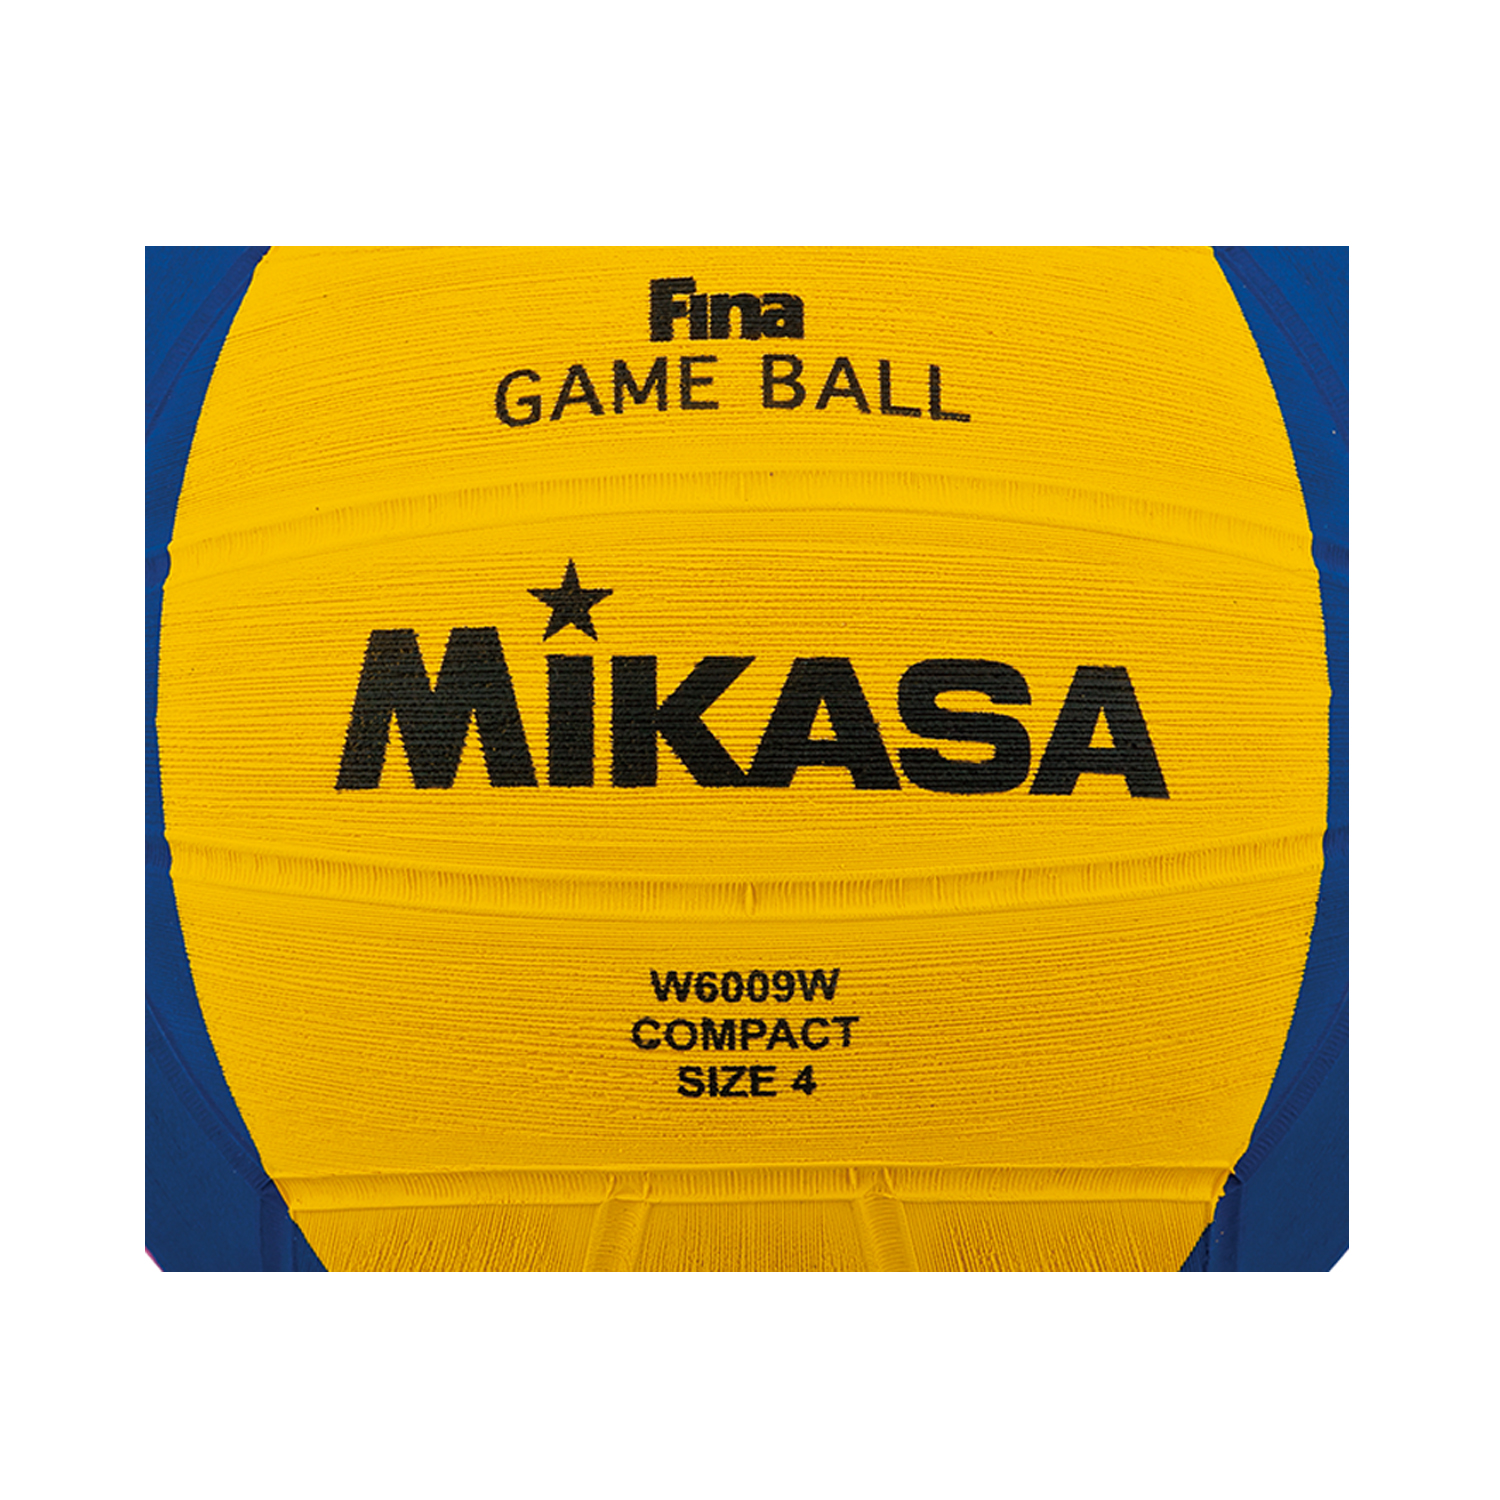 MIKASA W6009W WATER POLO BALL, , large image number null